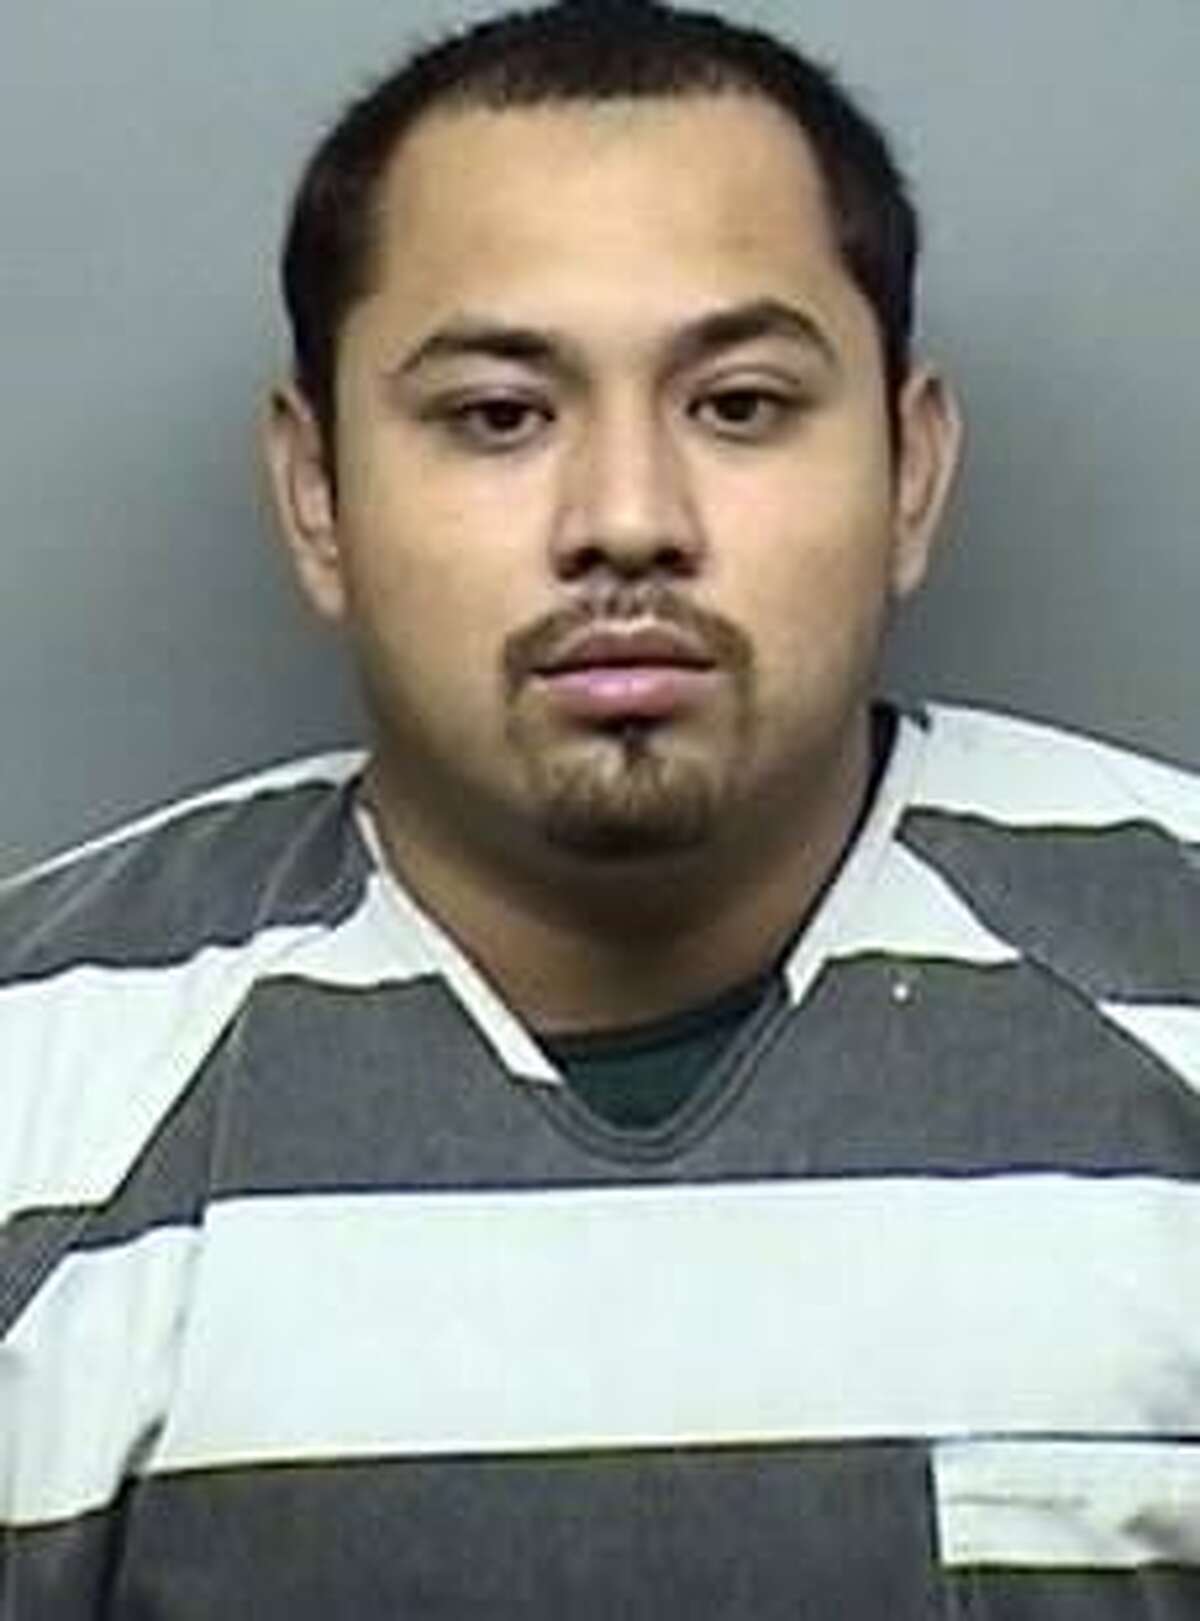 Christian Yepez is accused of killing a 3-year-old girl inside a local motel’s restroom.